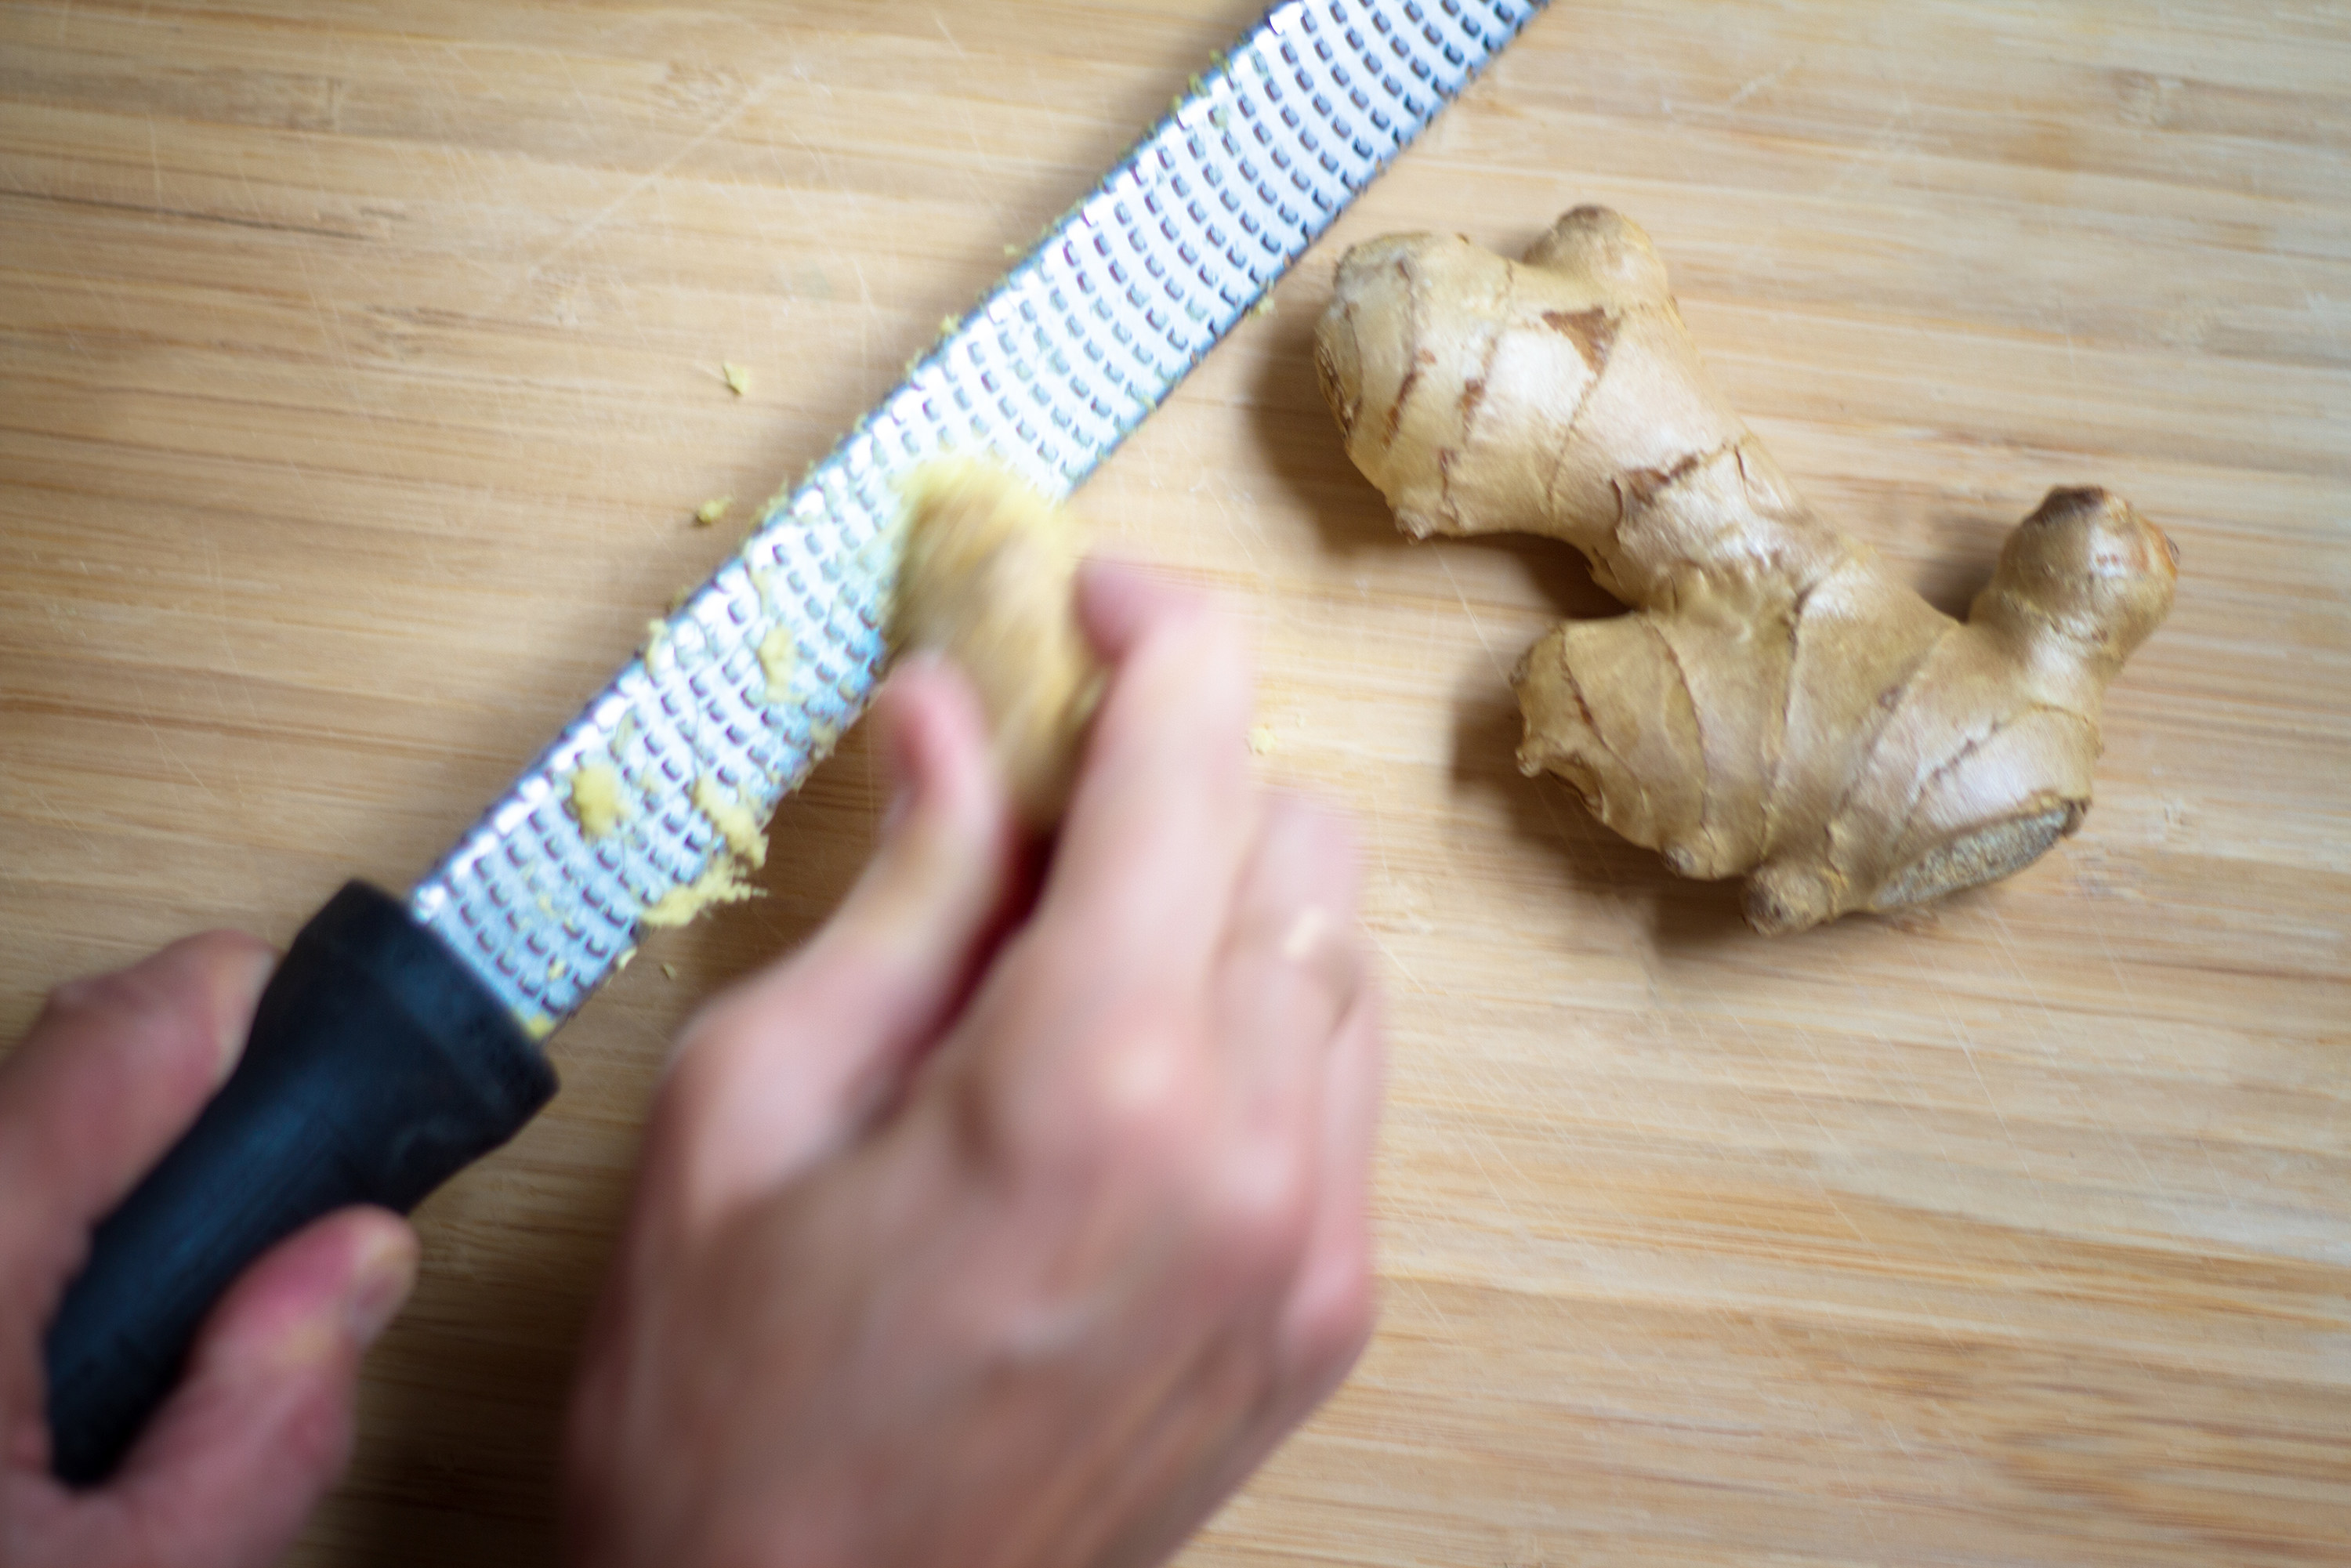 Hands grating ginger with a microplane.